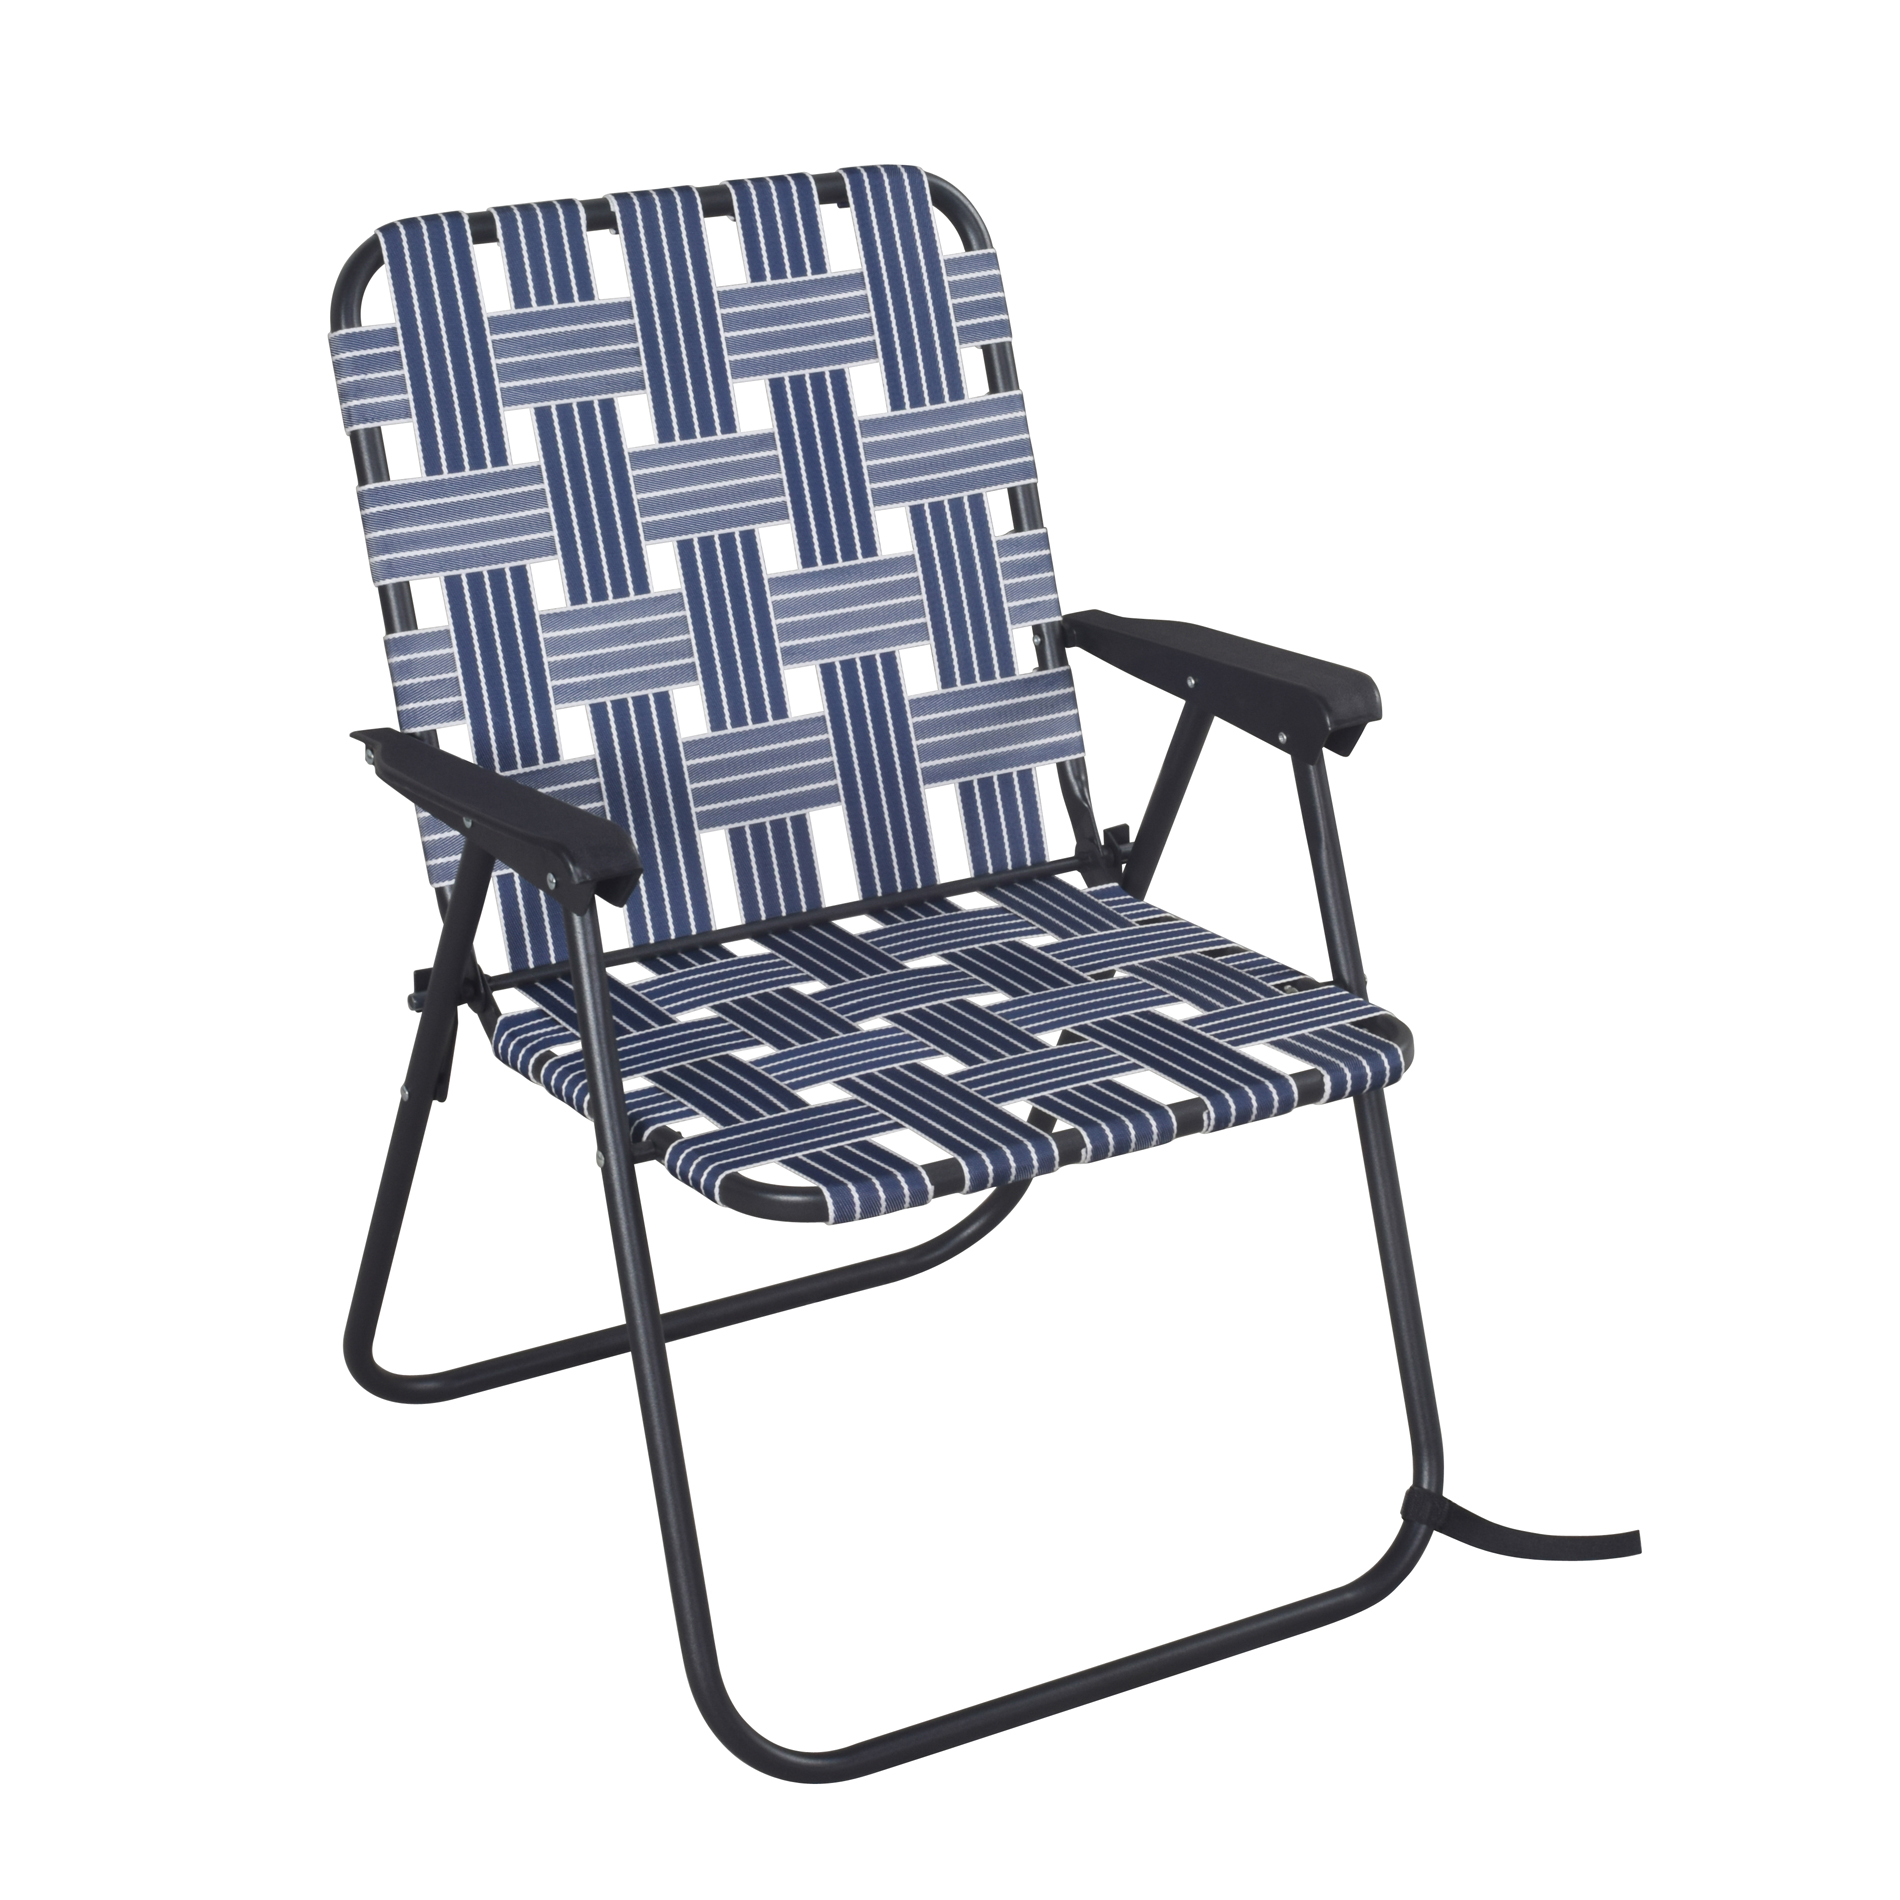 Jaclyn Smith Double Facing Web Chair - Blue *Limited Availability